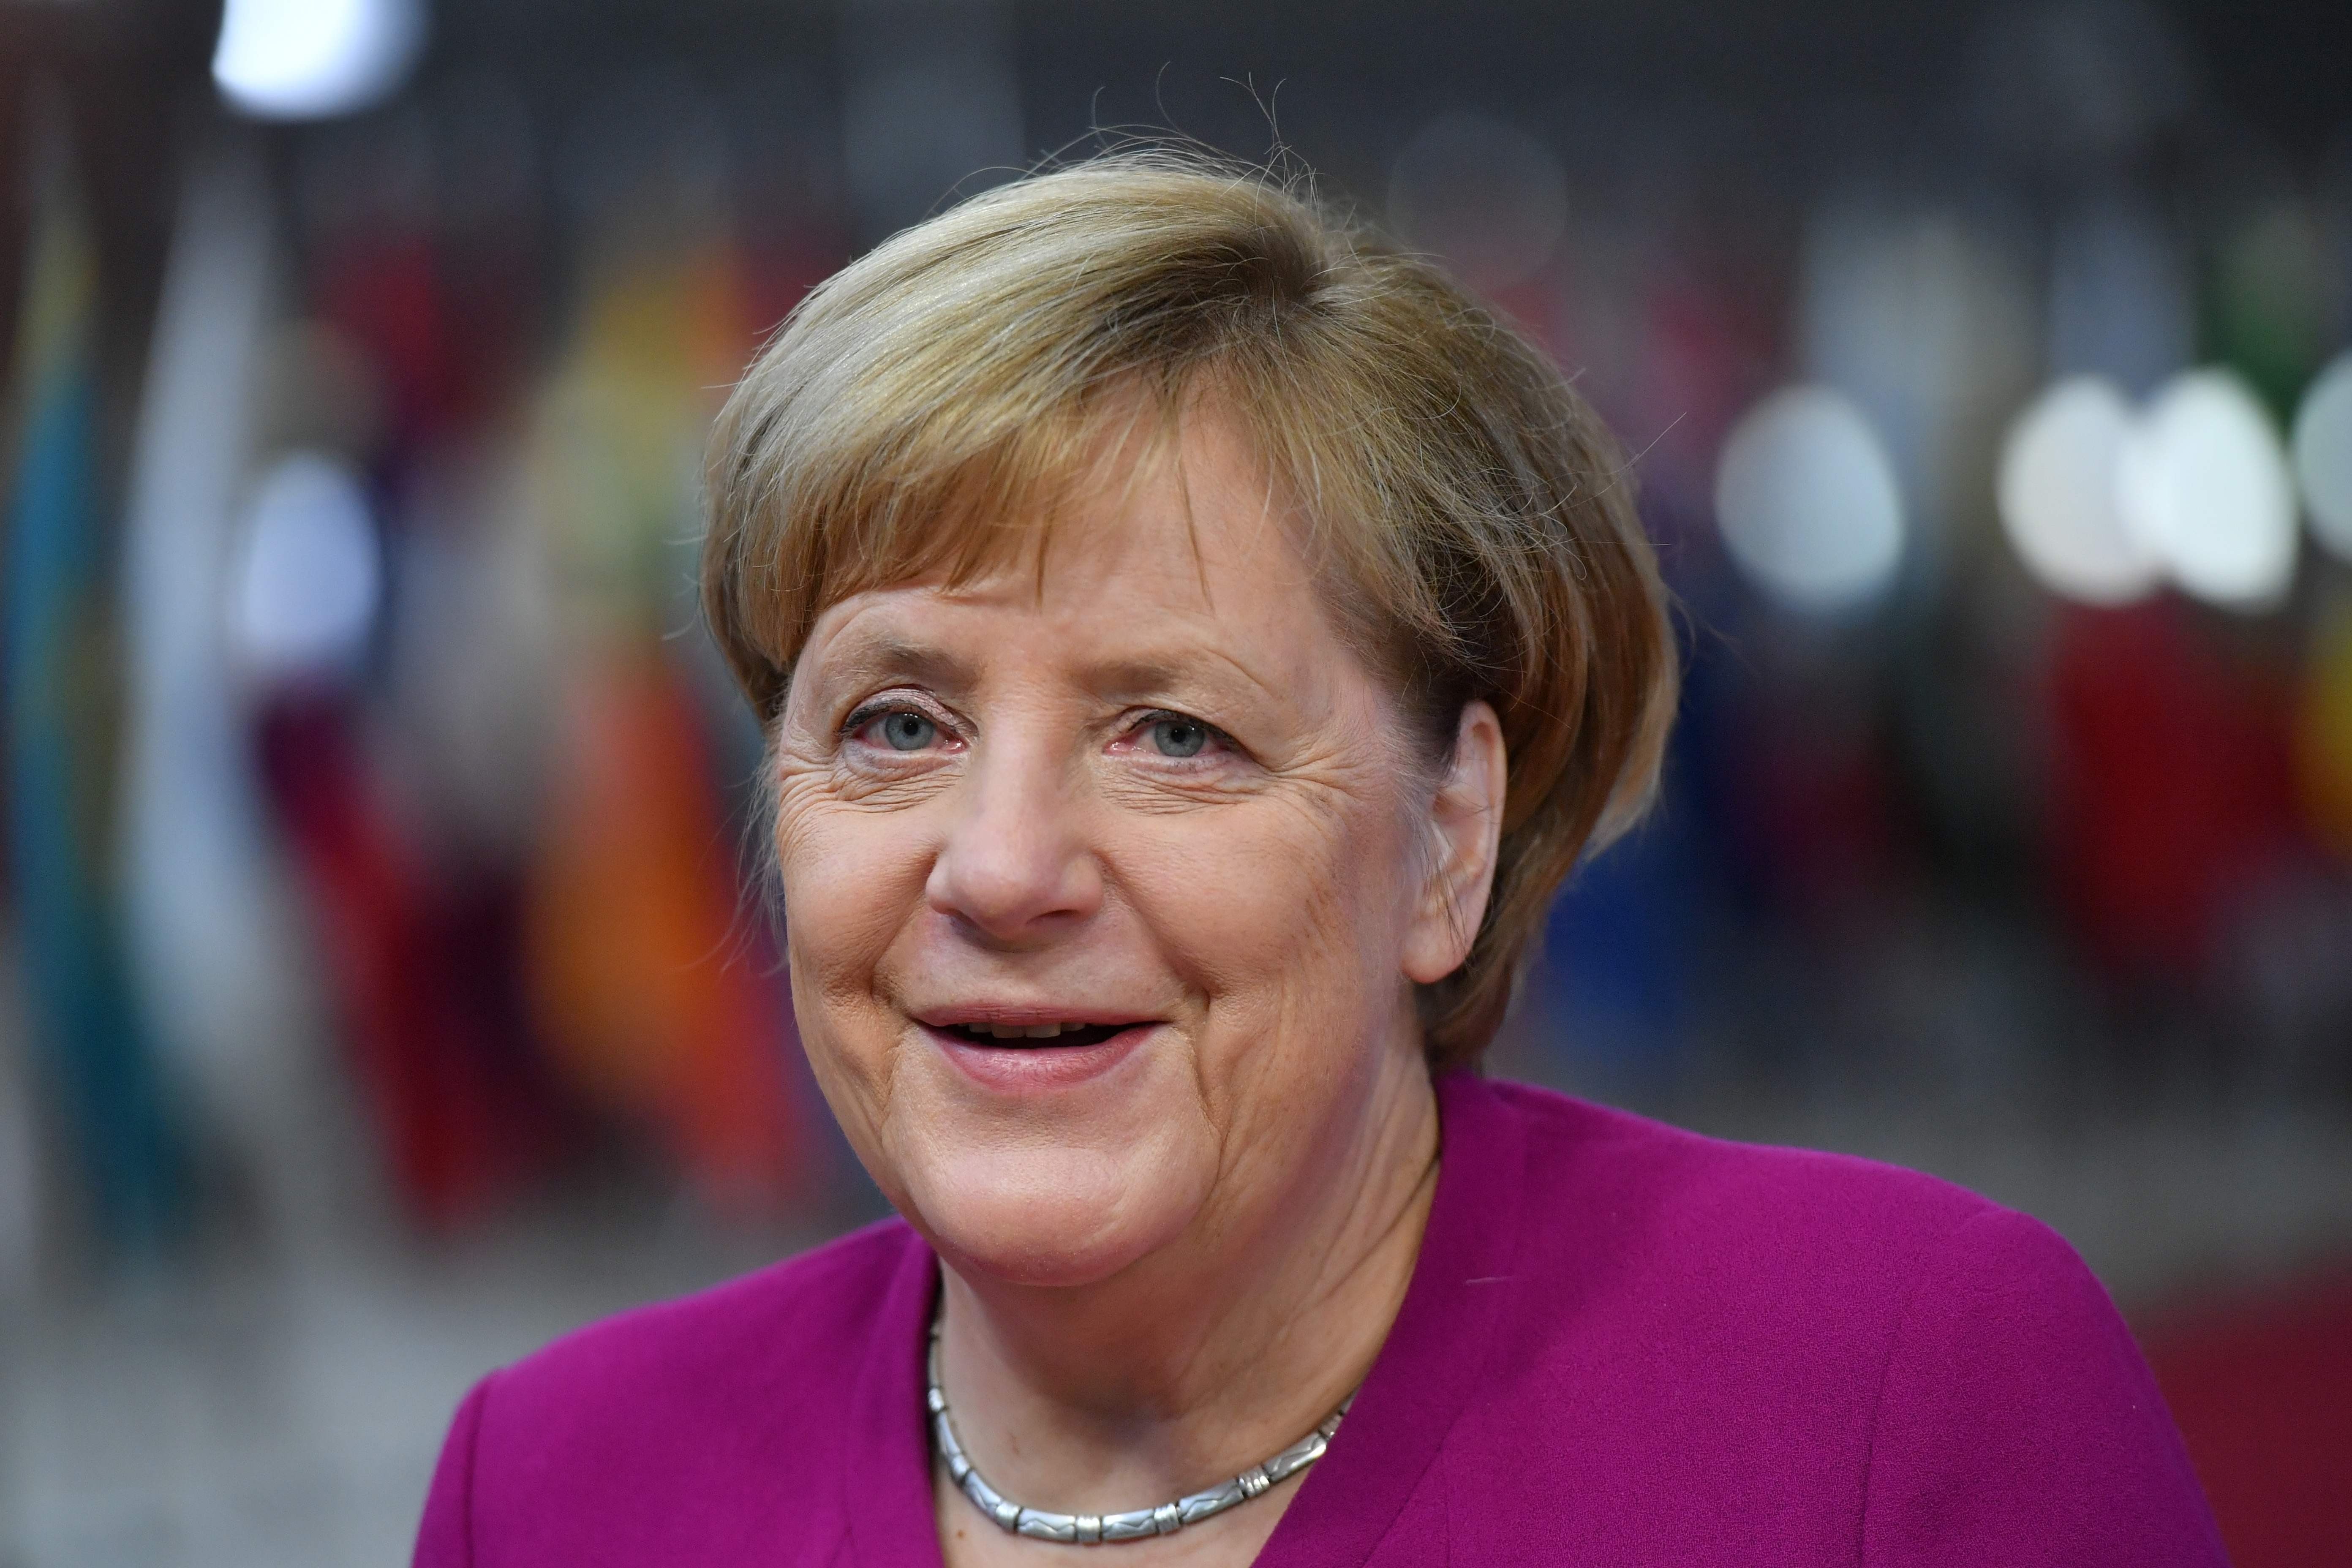 Angela Merkel has made a great personal effort to promote German business in China during her 13 years as chancellor. Photo: AFP